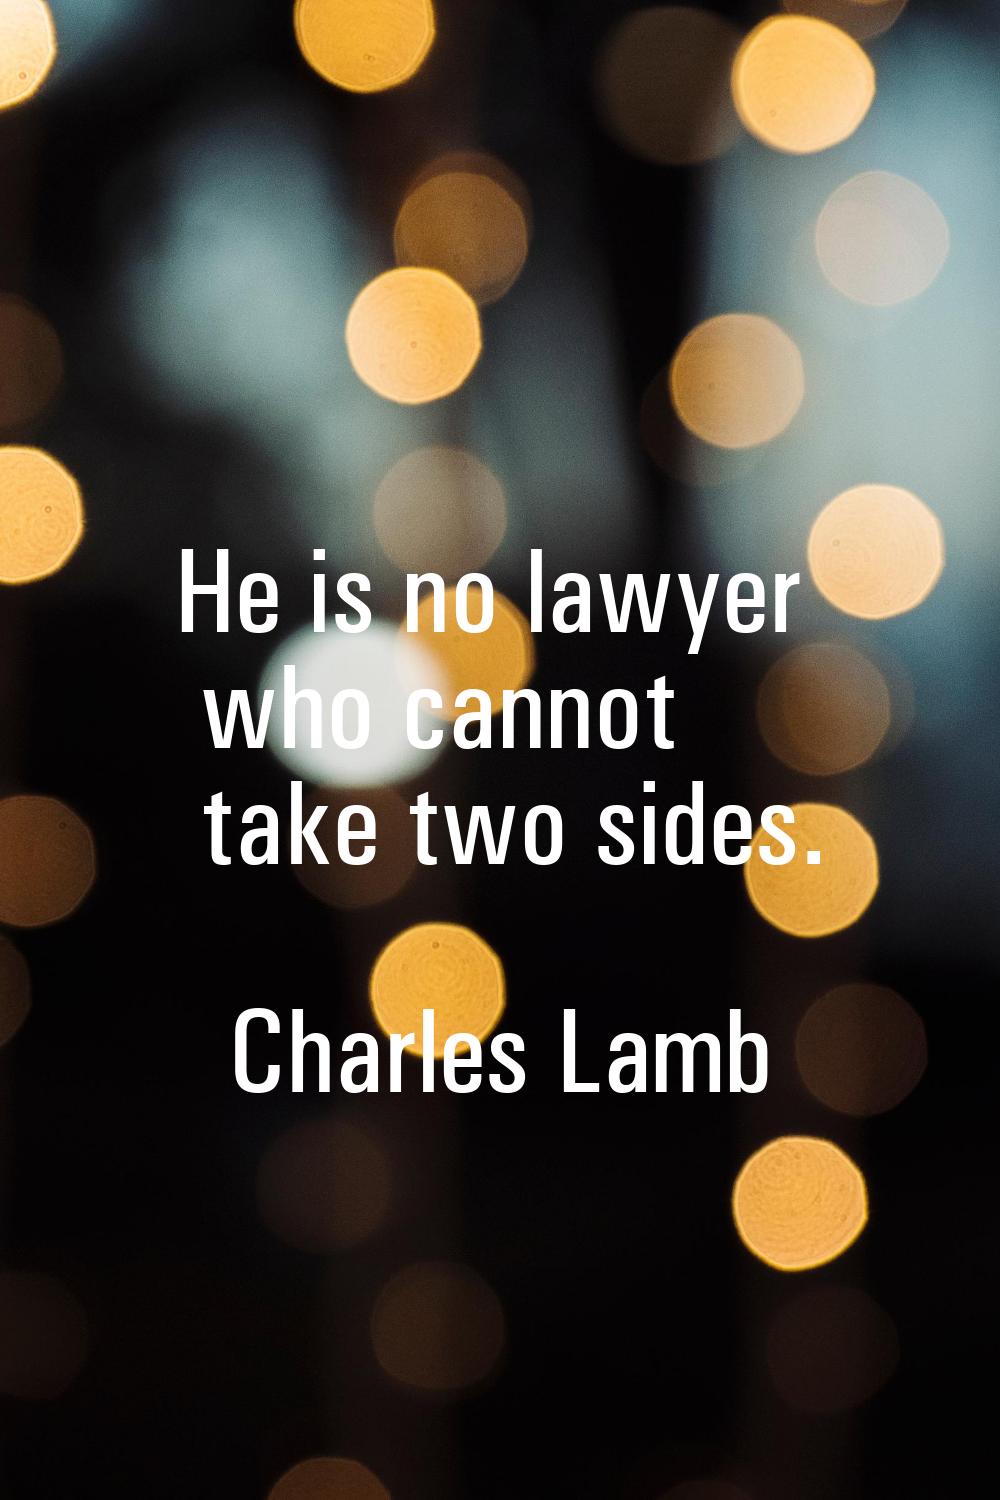 He is no lawyer who cannot take two sides.